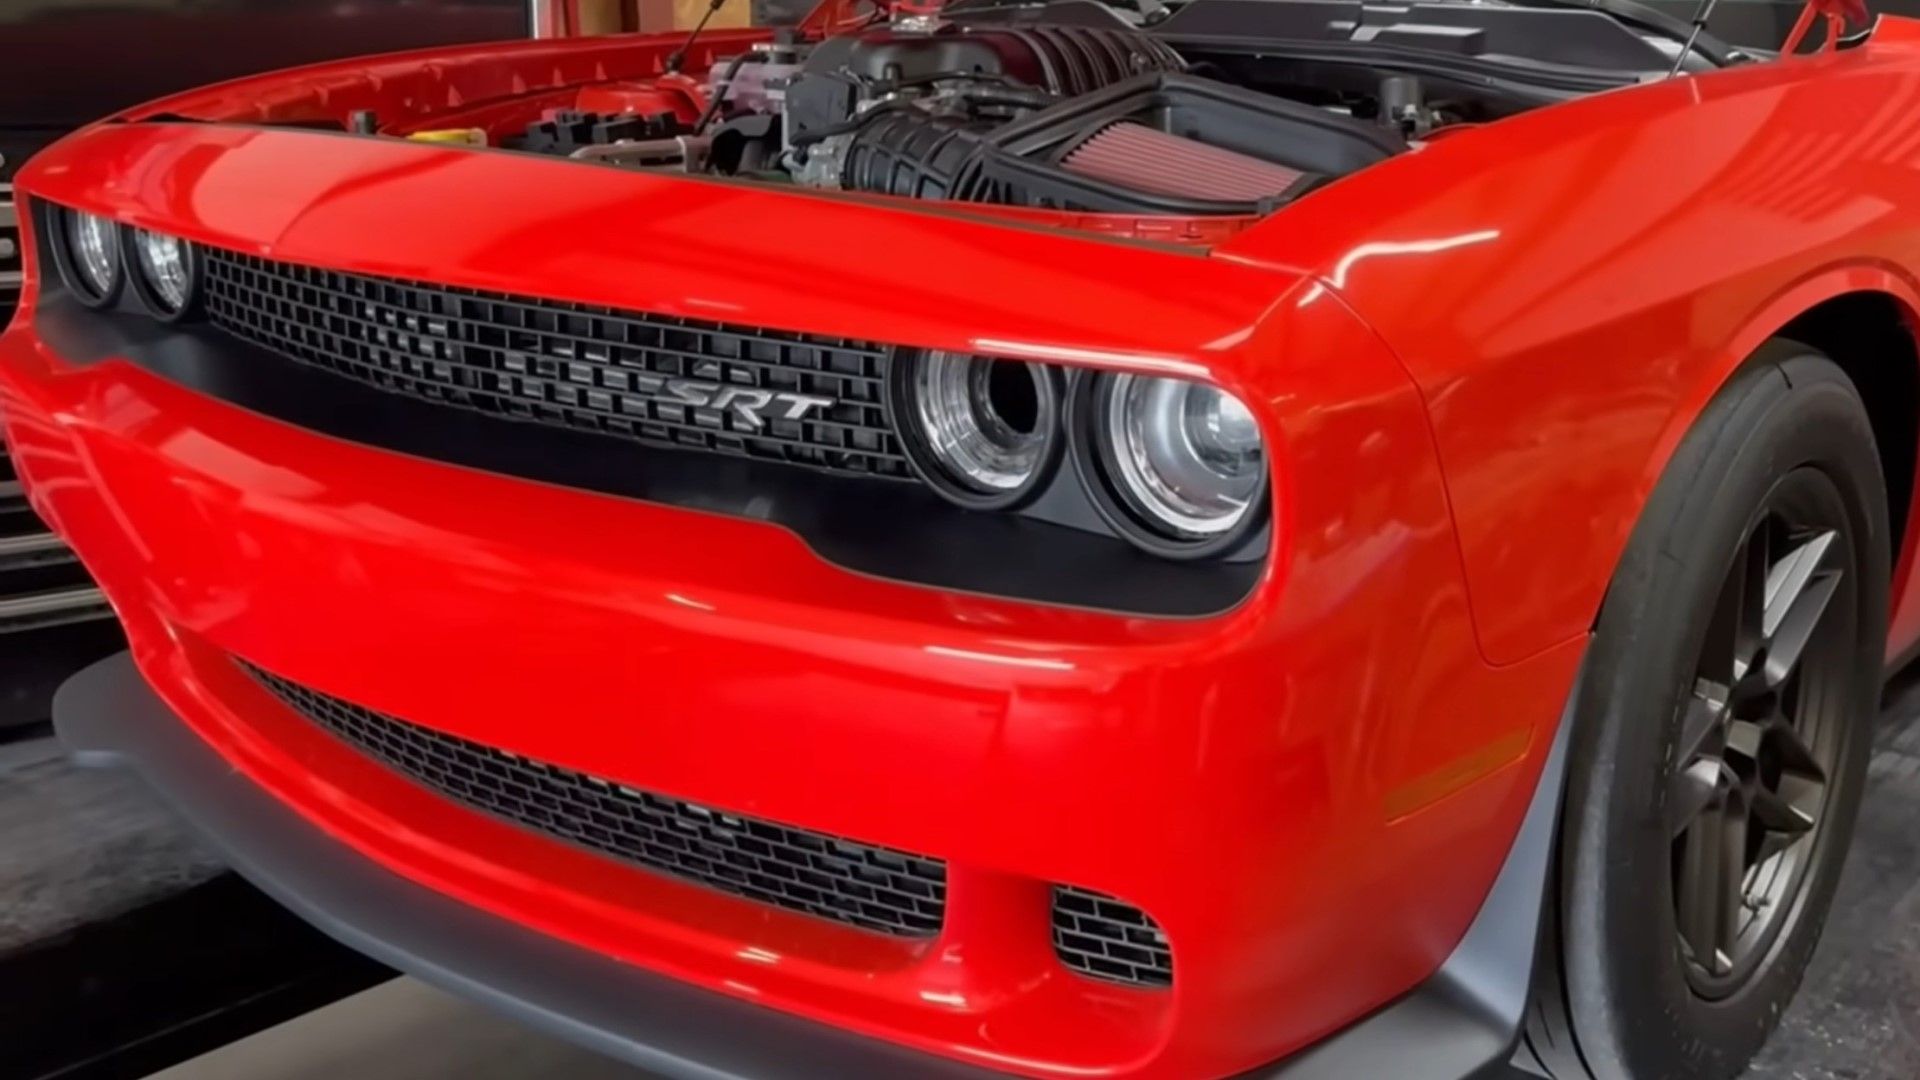 Seven Key Facts About the 2019 Dodge Challenger